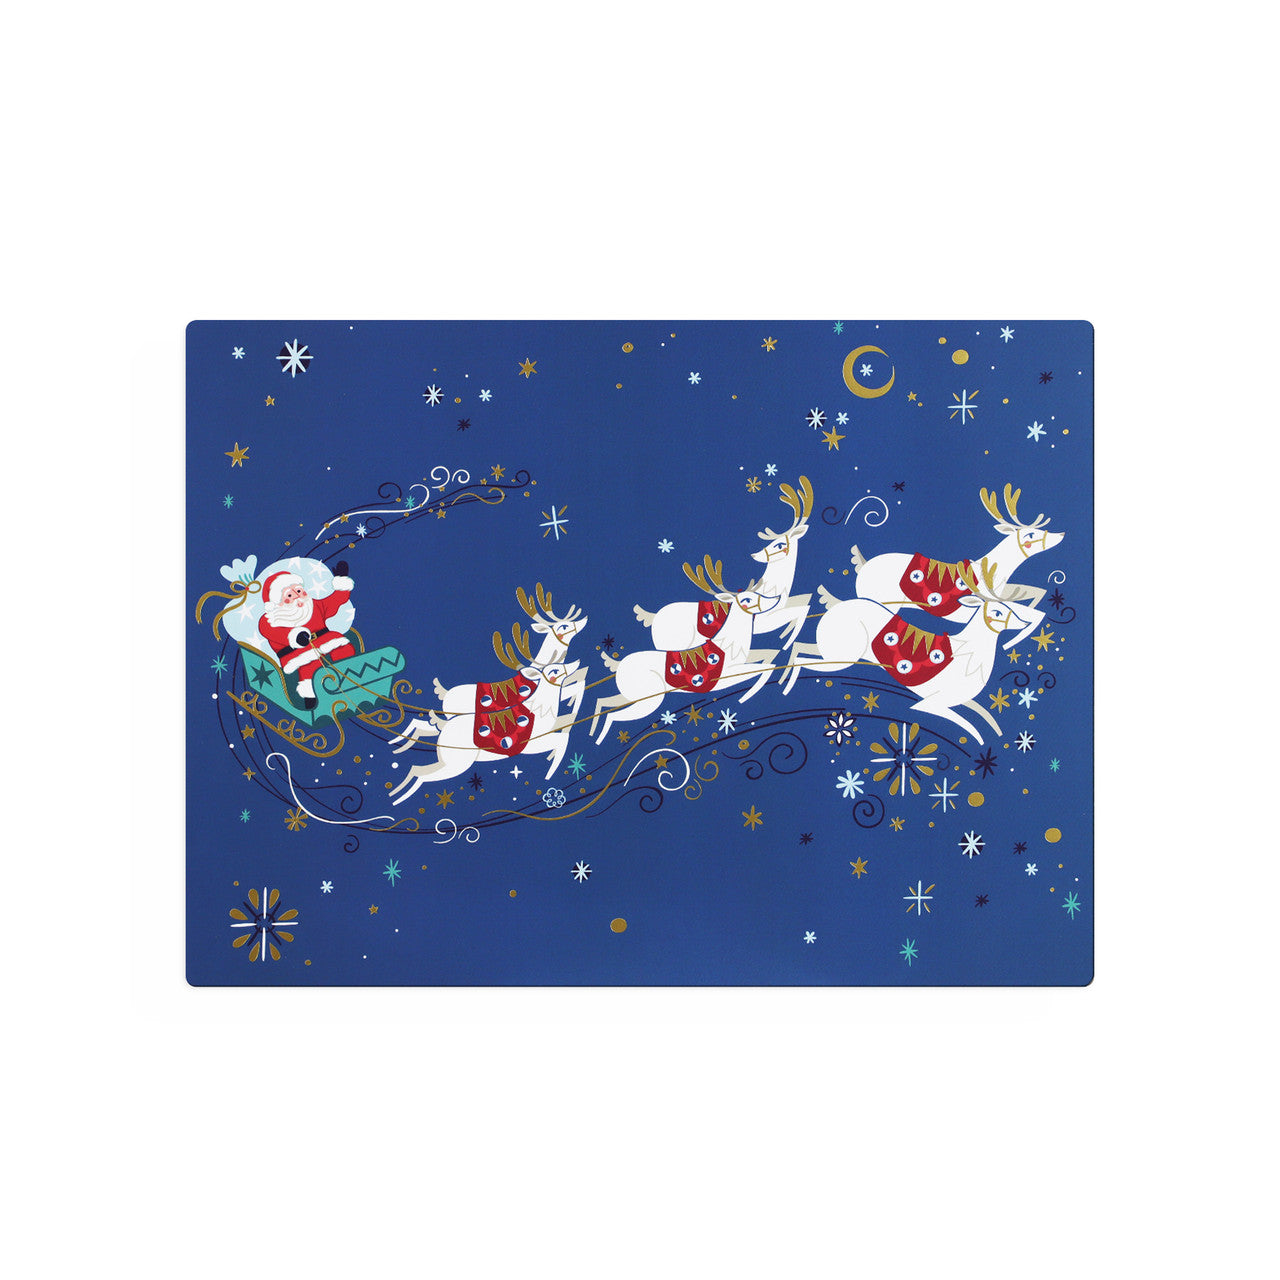 Christmas Placemats Set of 6  Gather your loved ones for a holiday celebration to remember. Our Christmas Tableware is made to bring festive happiness to lunch, dinner and every meal in between. 